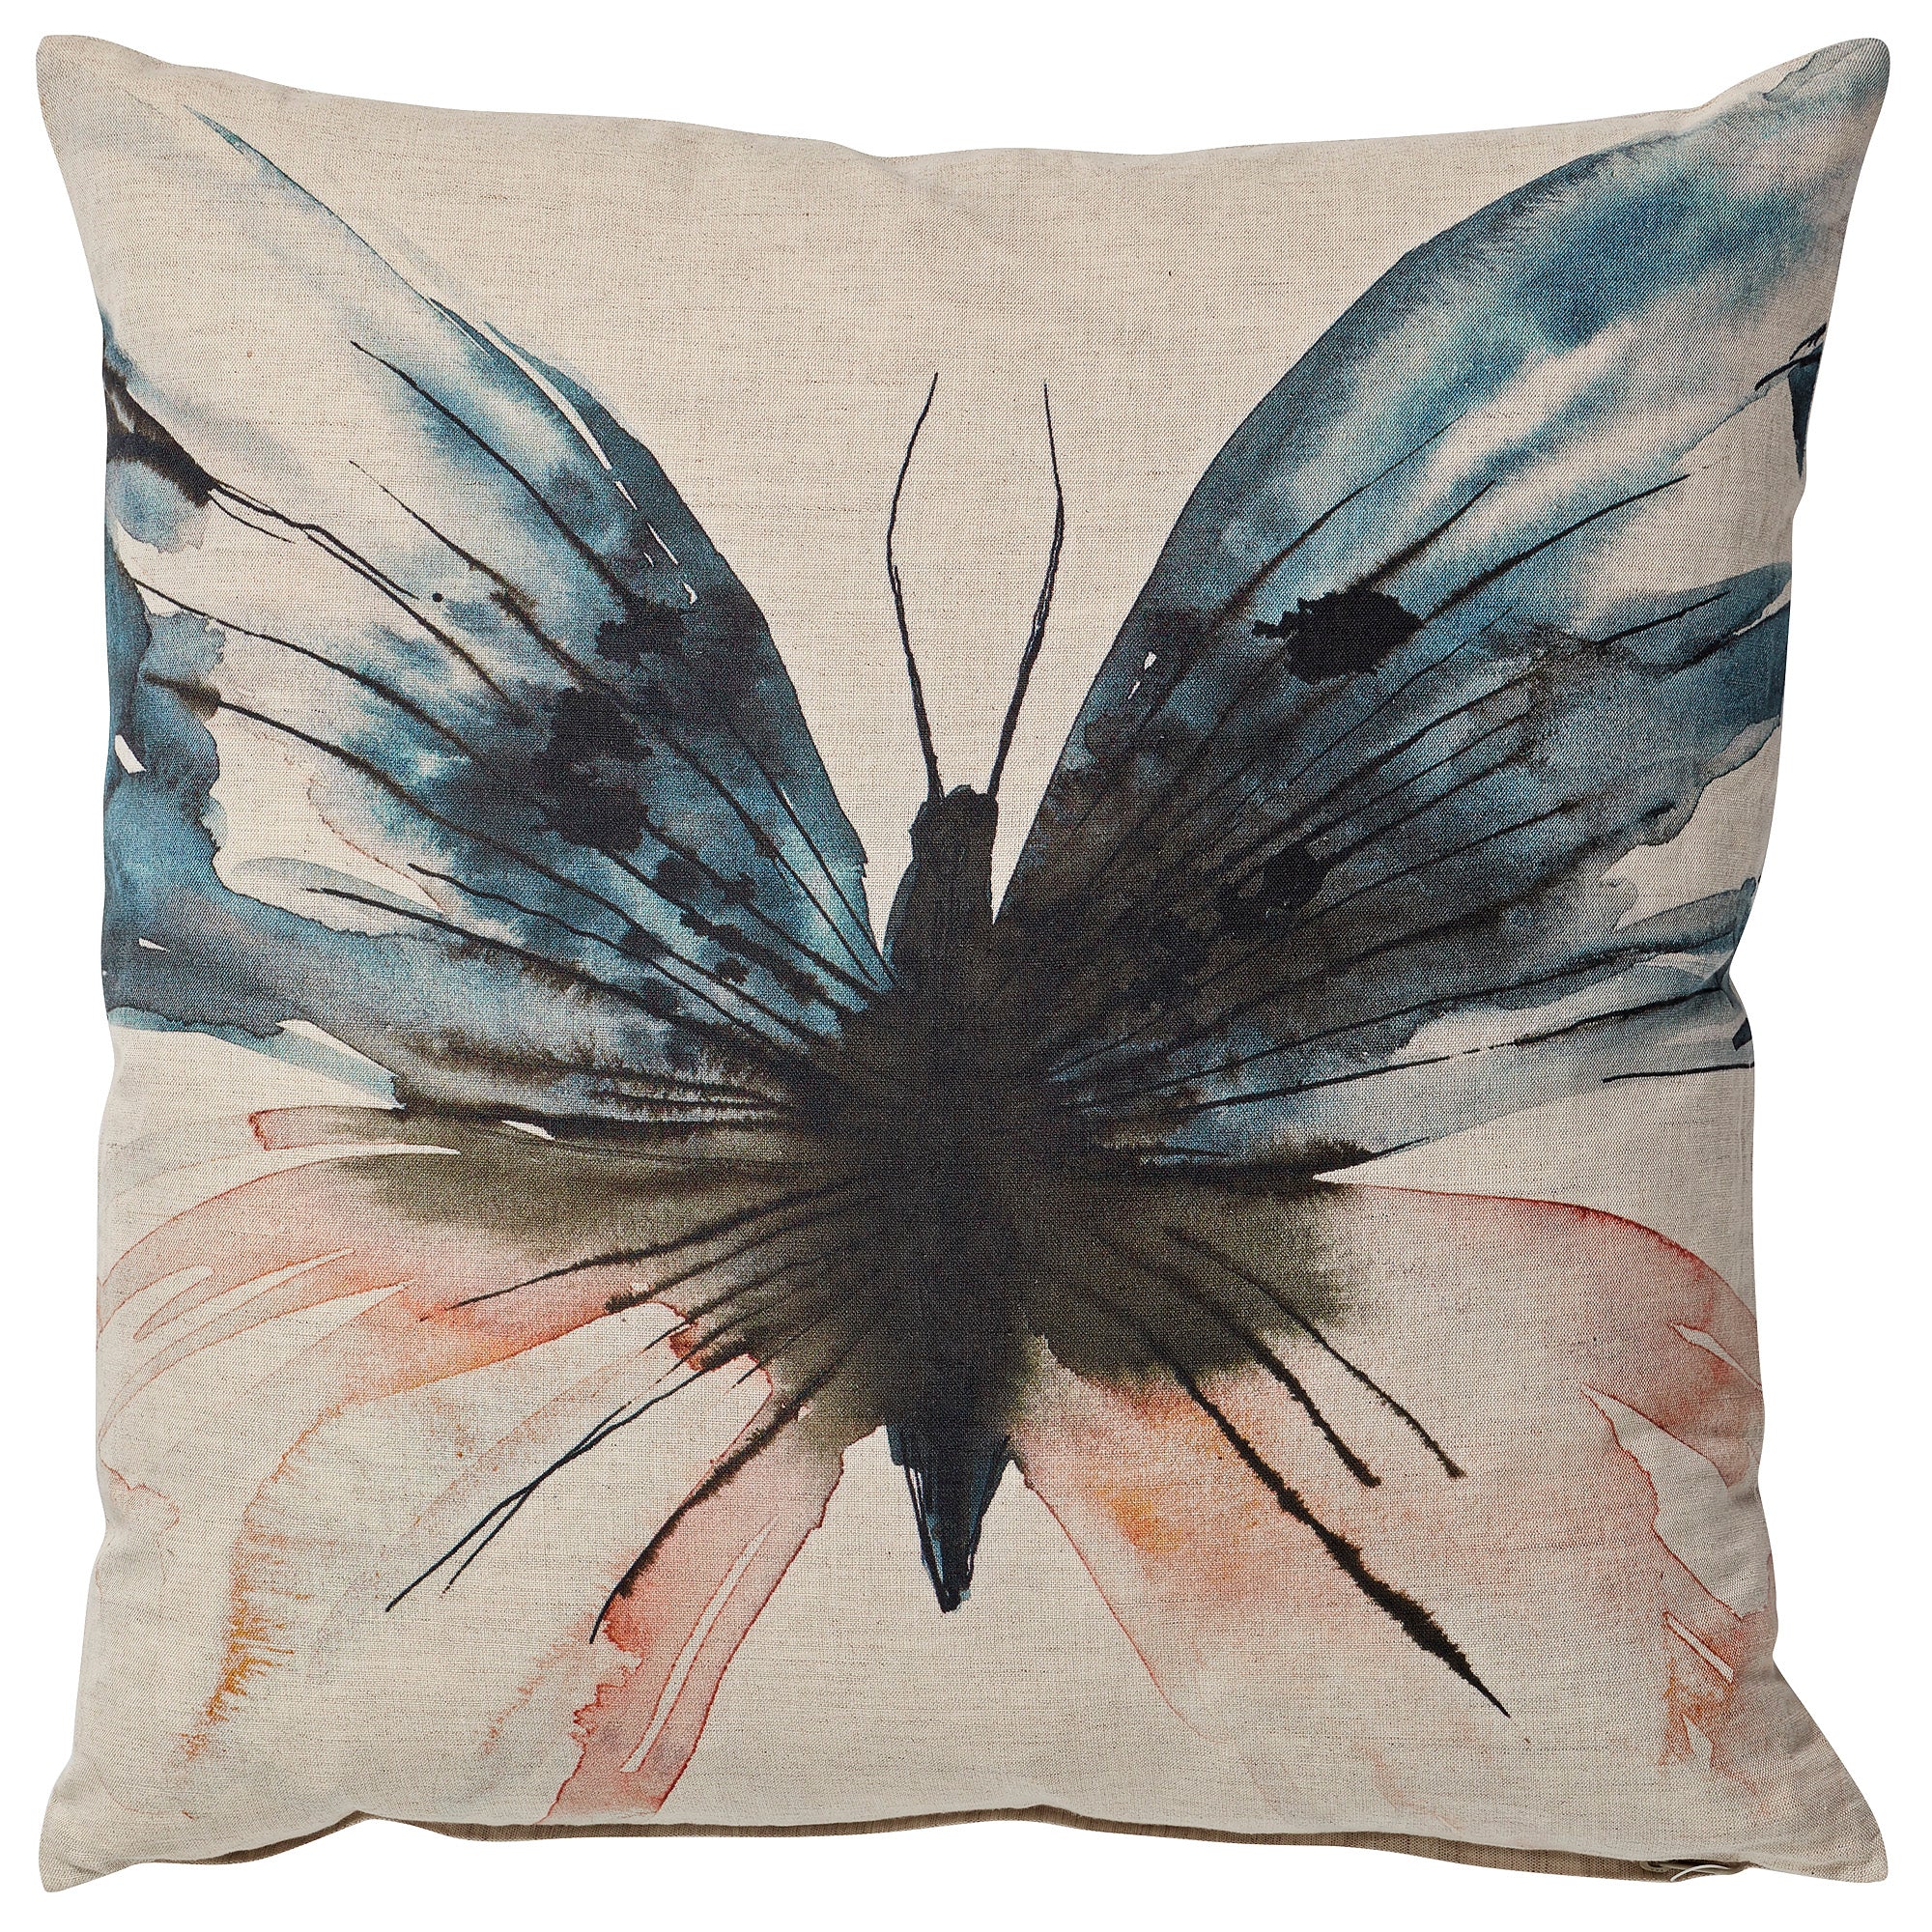 Lene Bjerre Birea Cushion filled with Duck feathers - 50x50cm